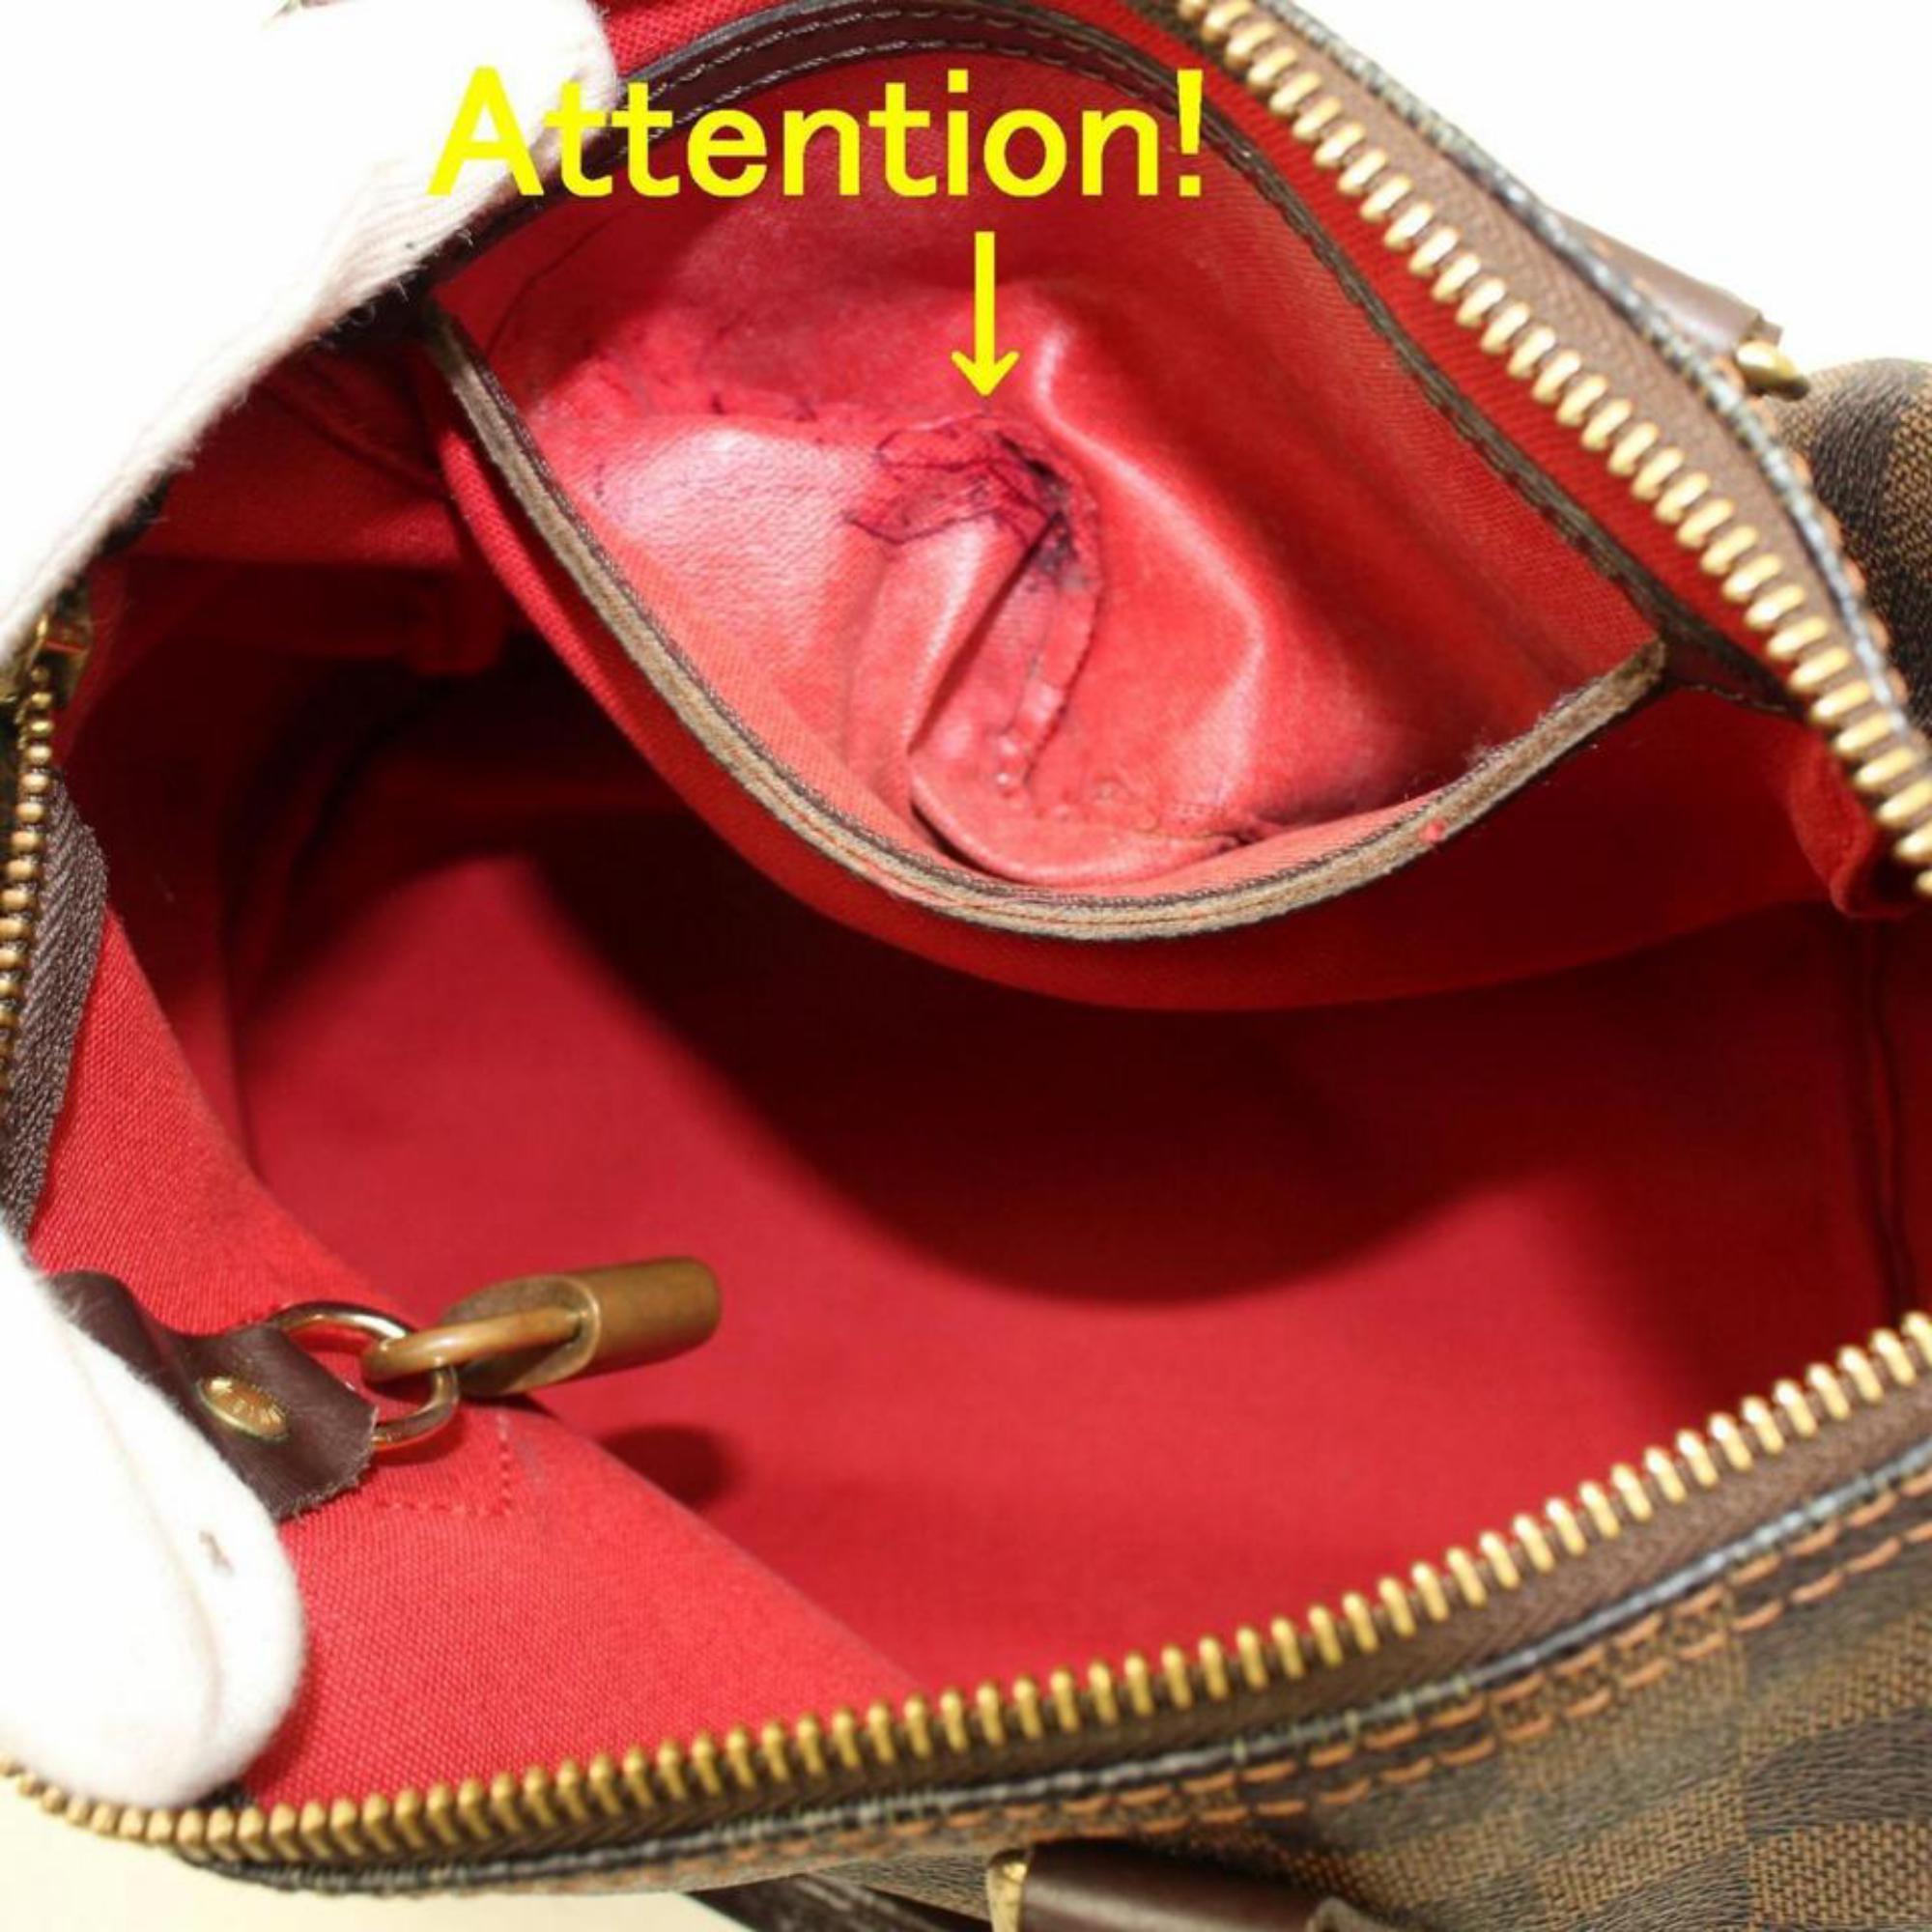 Louis Vuitton Speedy Damier Ebene 25 867632 Brown Coated Canvas Satchel In Good Condition For Sale In Forest Hills, NY